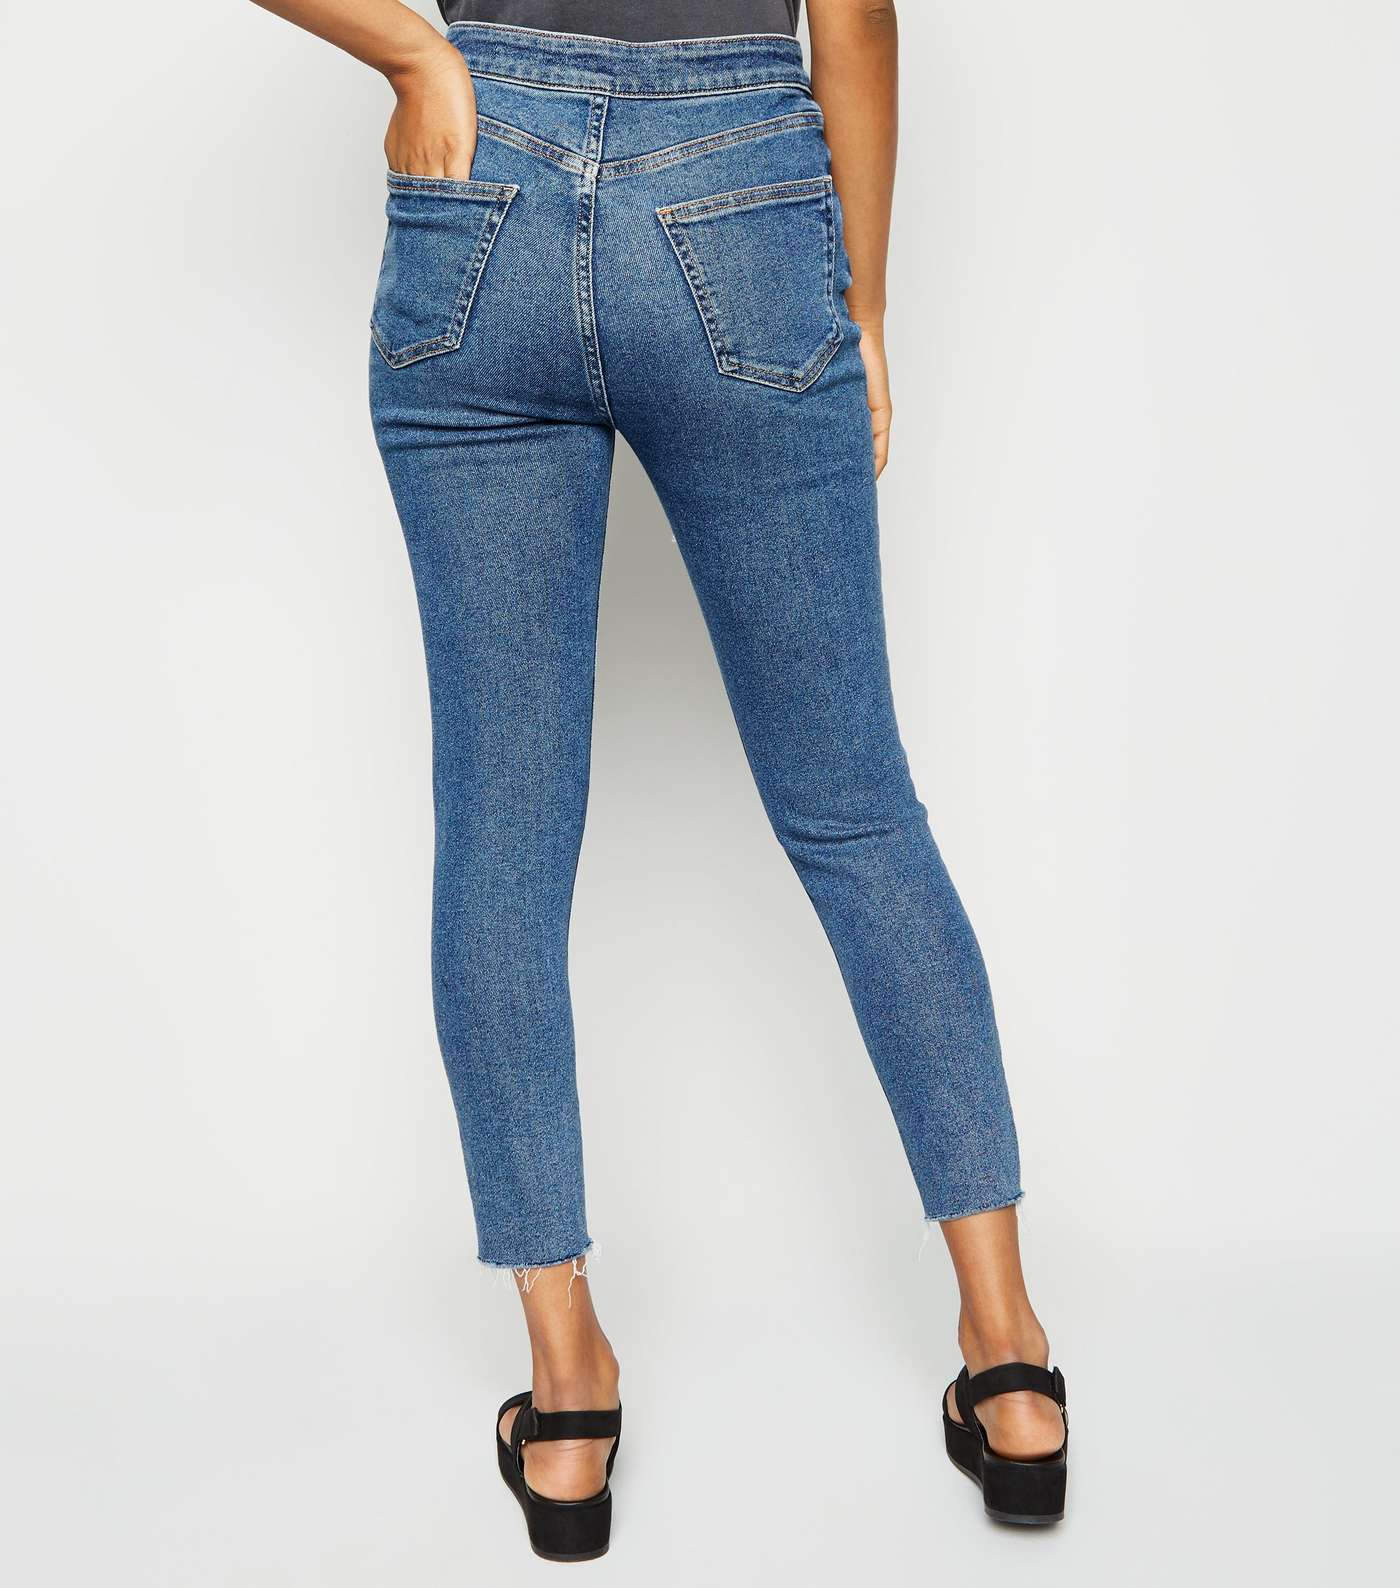 Petite Teal Ripped High Waist Super Skinny Jeans Image 3